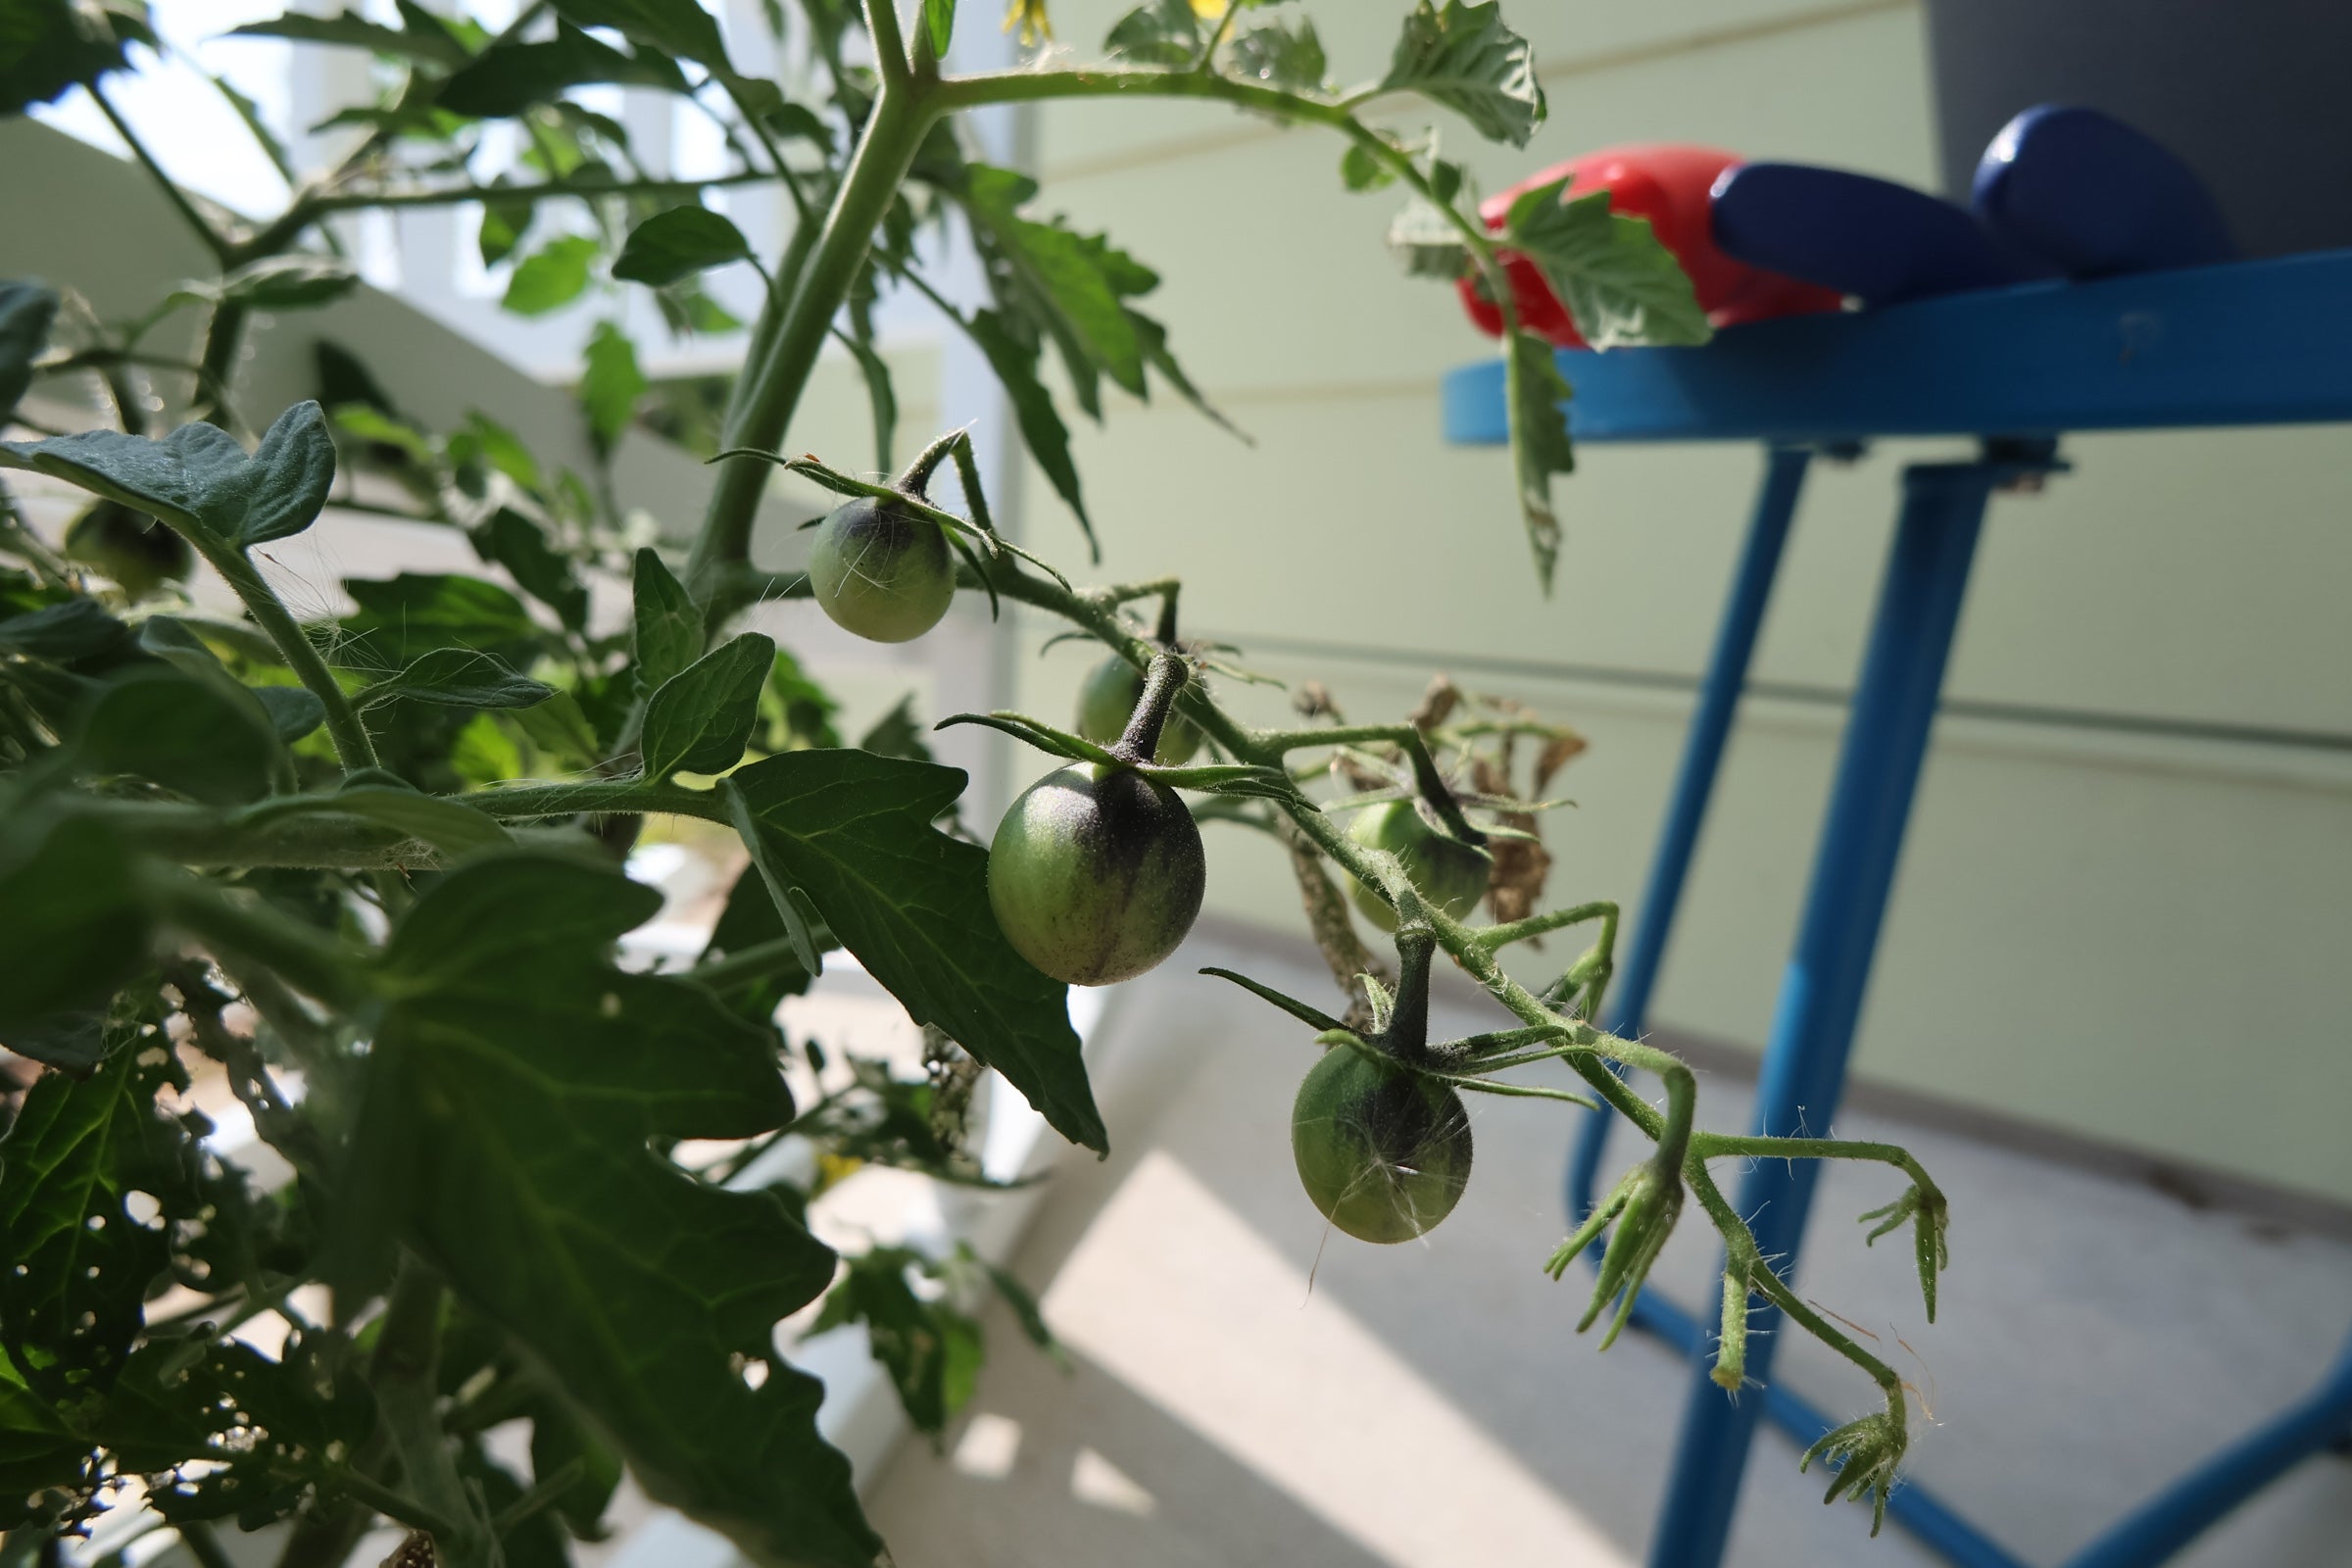 A photo of tomatoes on the plant